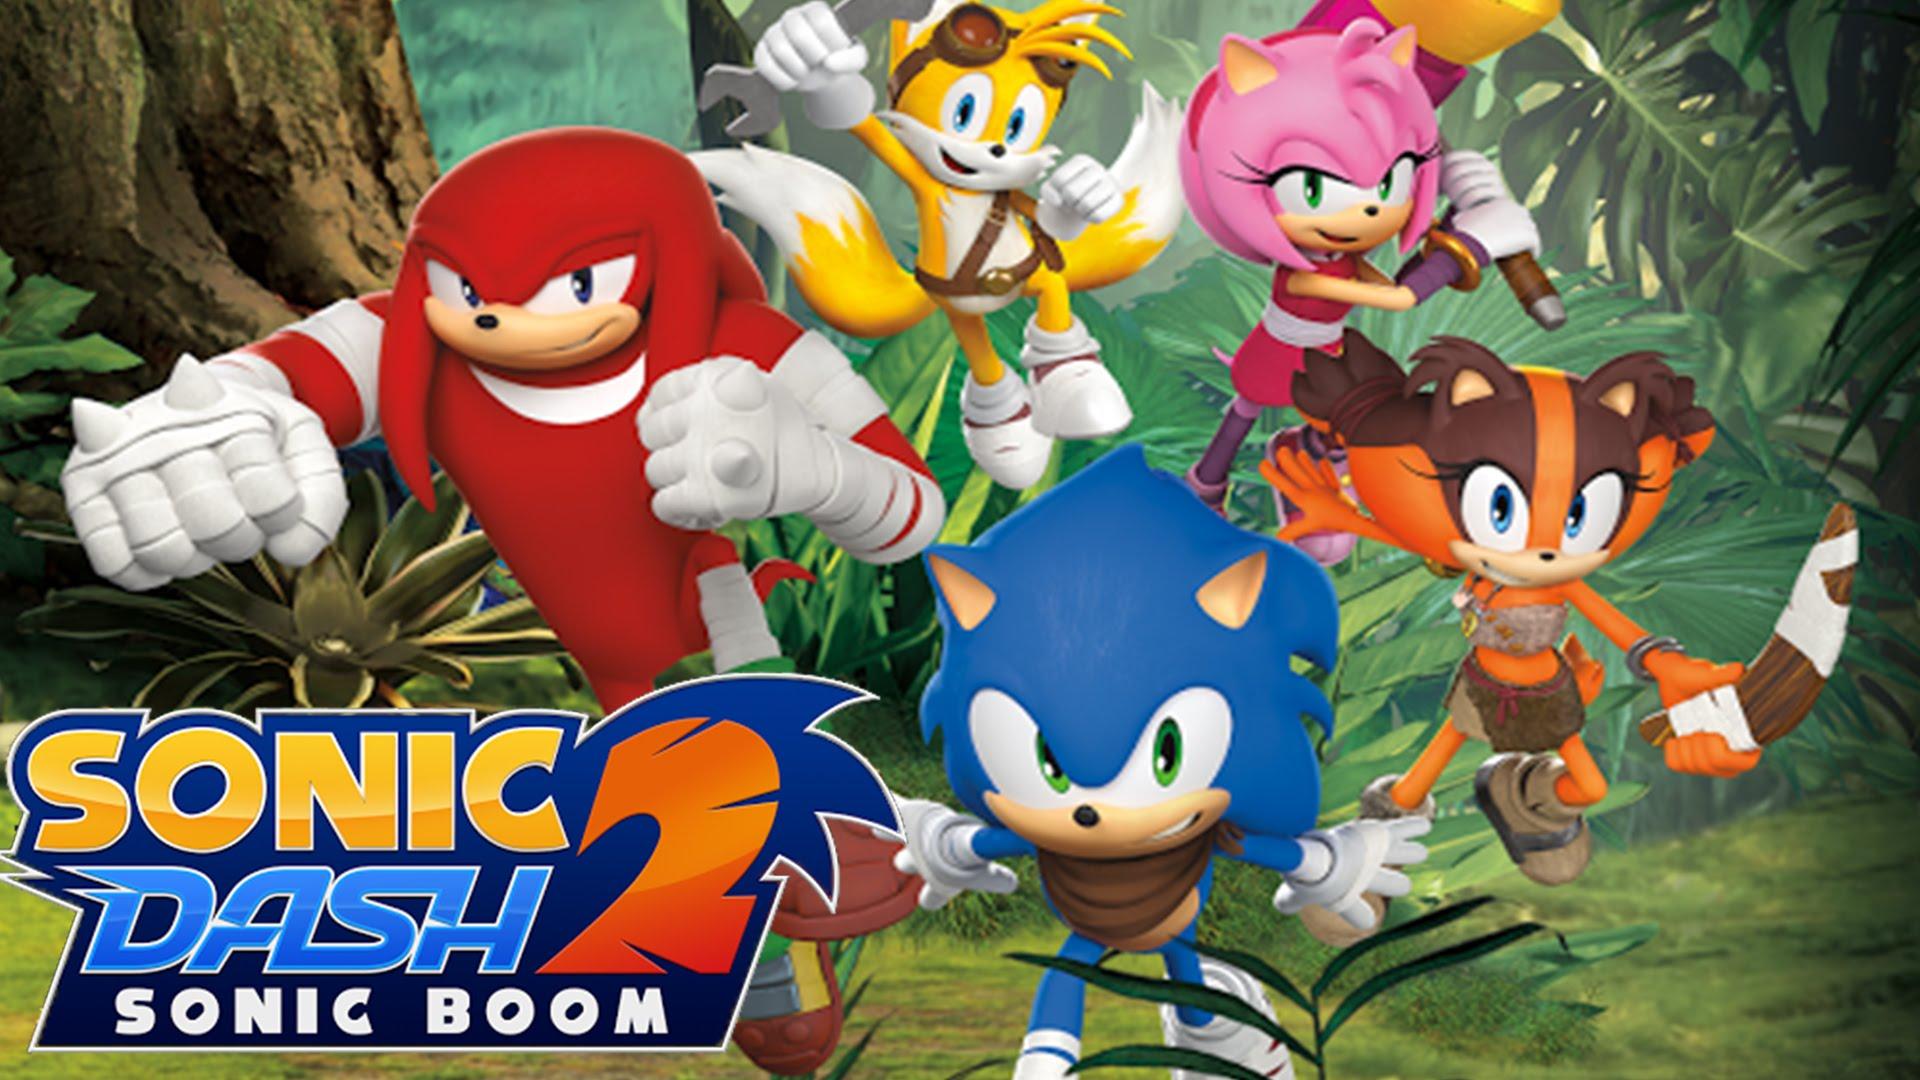 Sonic Dash 2: Sonic Boom Cheats: Tips & Strategy Guide to Get High